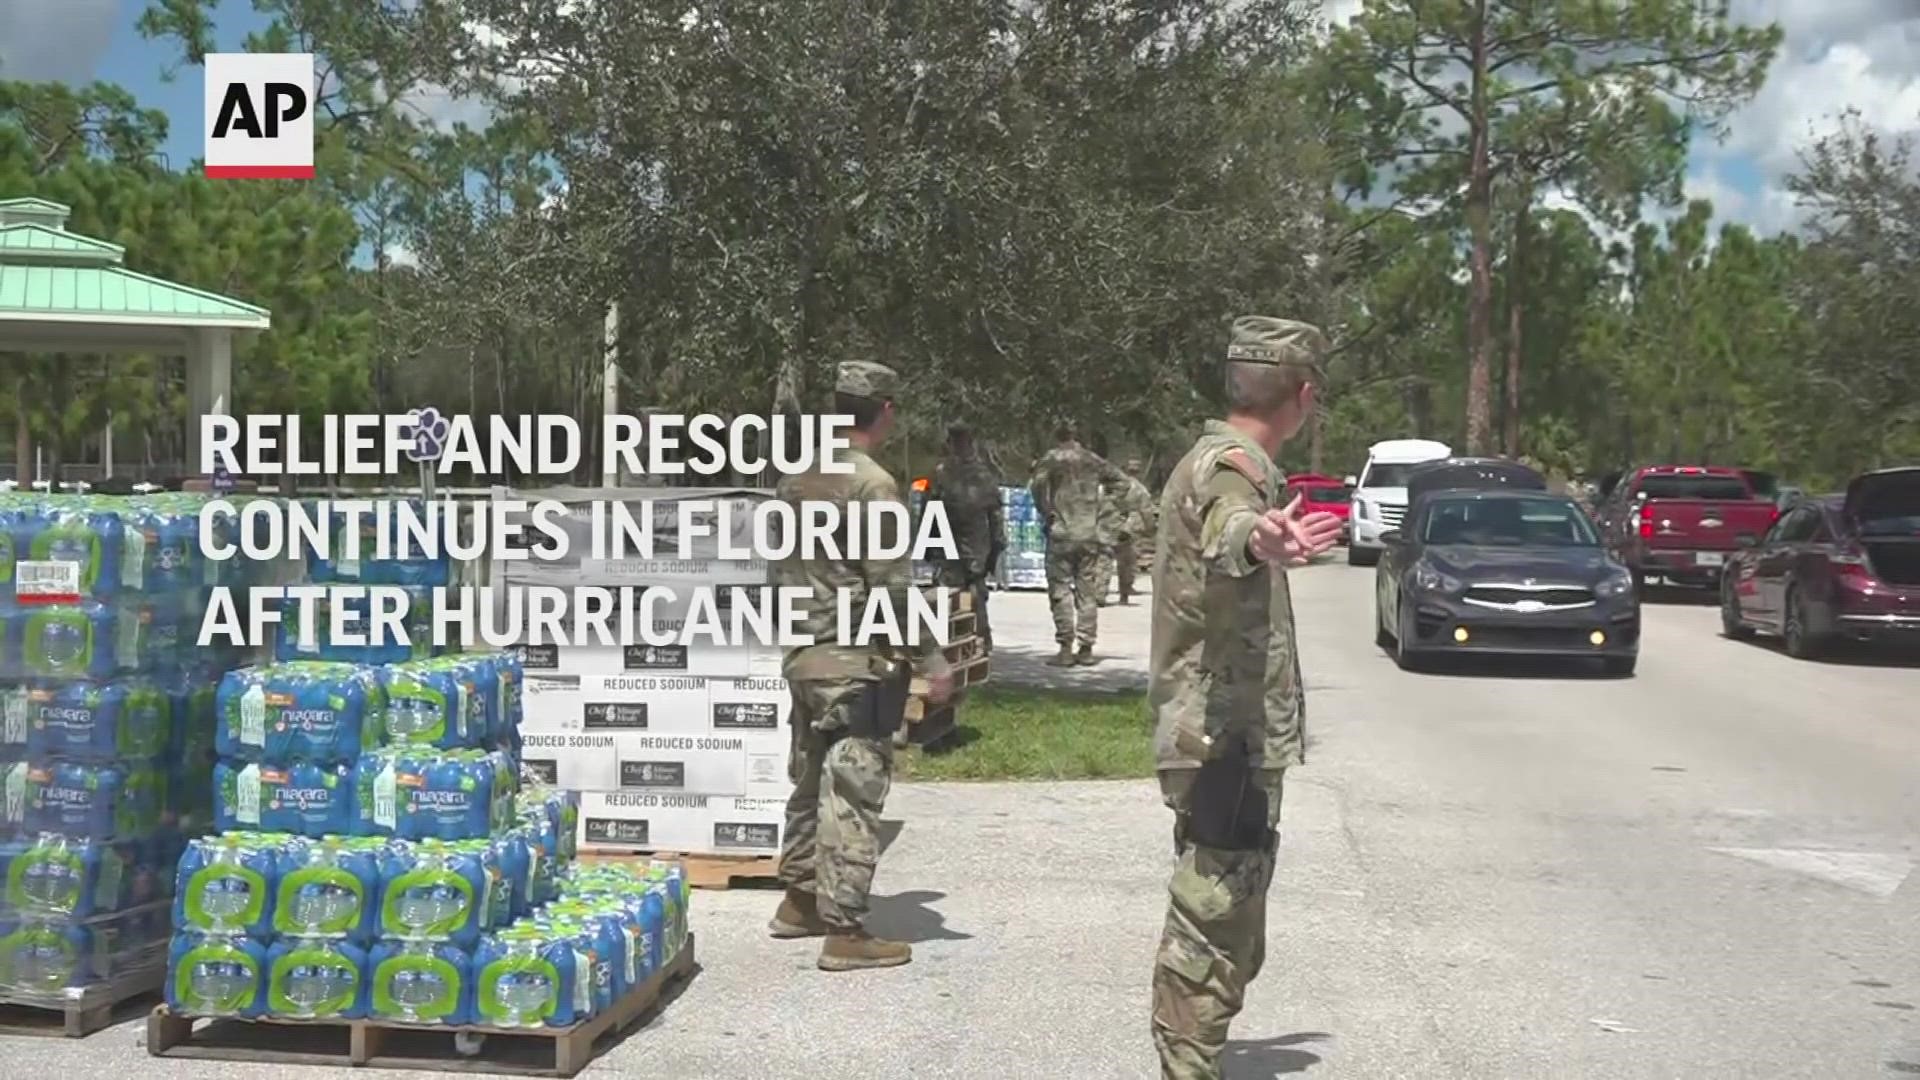 WATCH: Members of the National Guard distribute relief packages in the aftermath of Hurricane Ian.